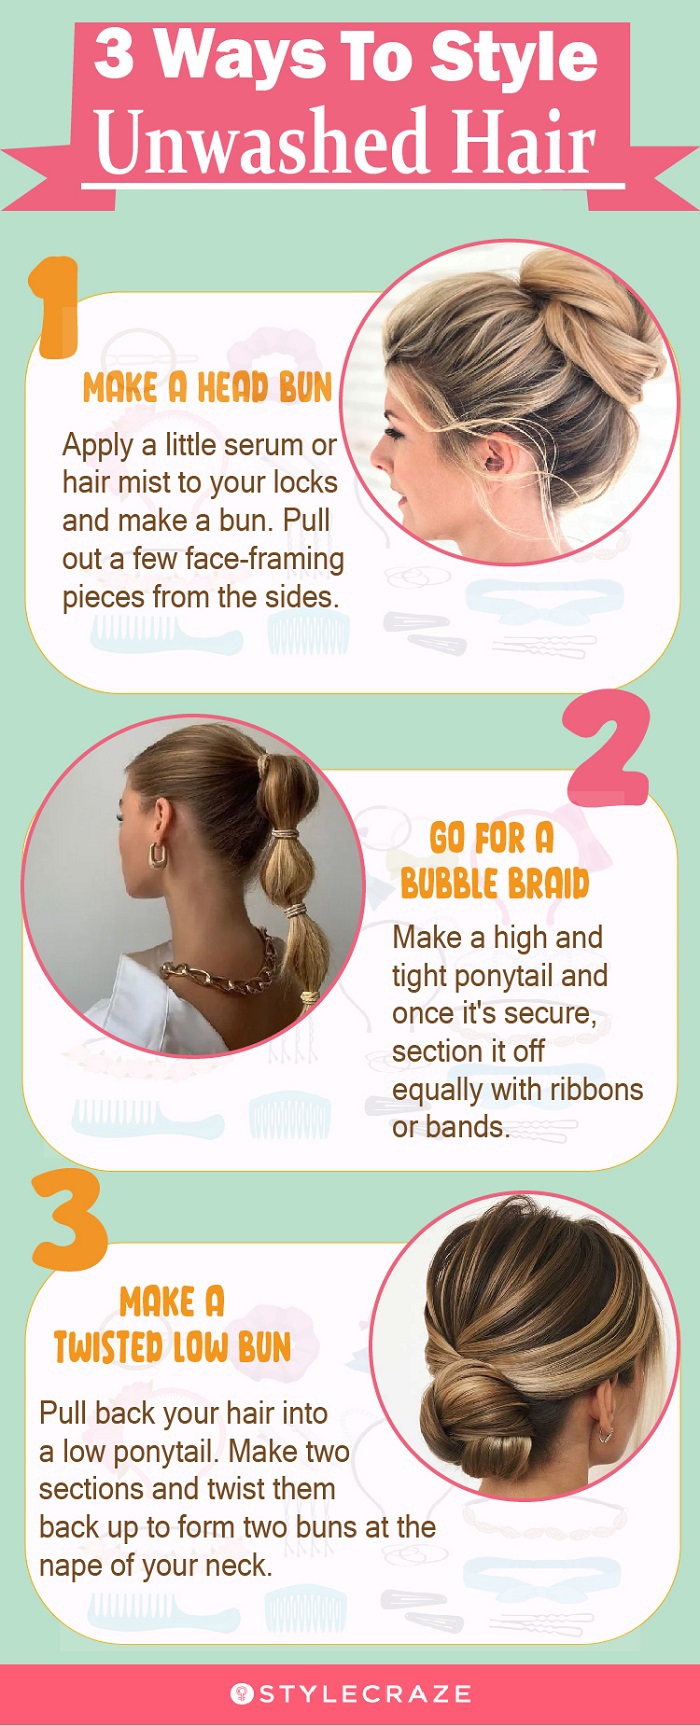 ways to style unwashed hair [infographic]